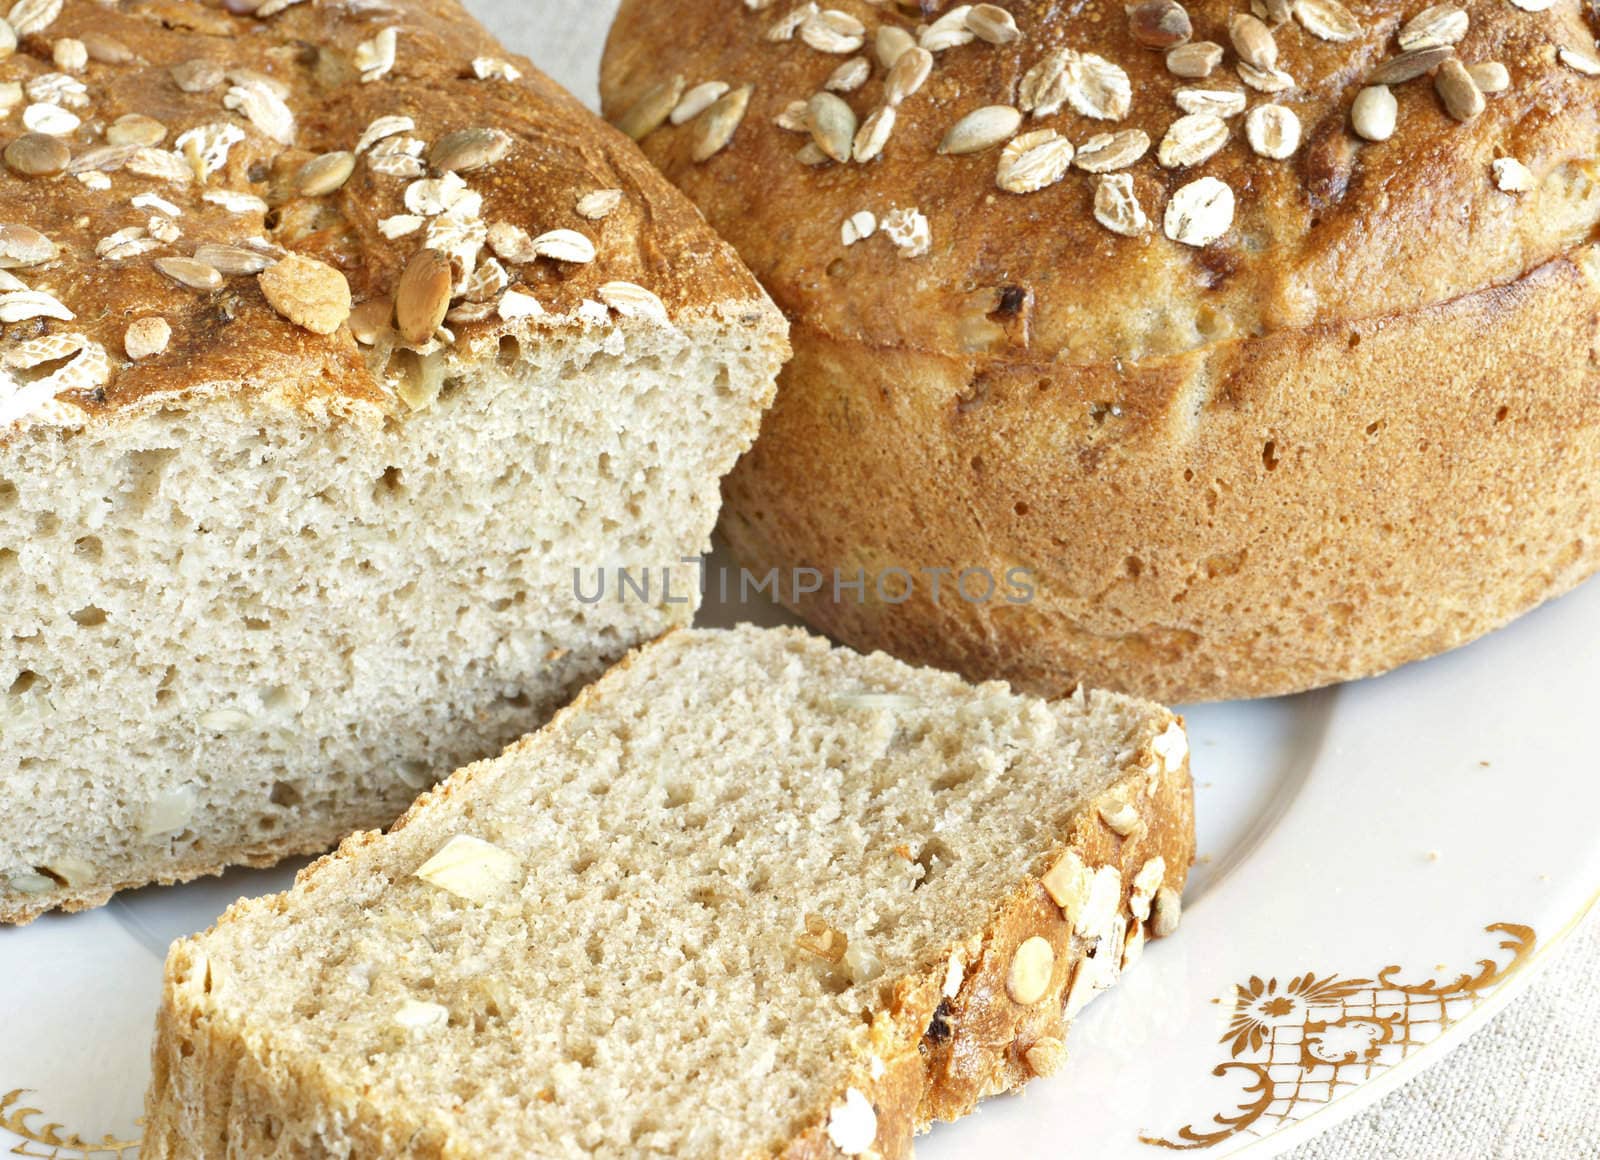 Oniony bread strewed with seeds on the plate